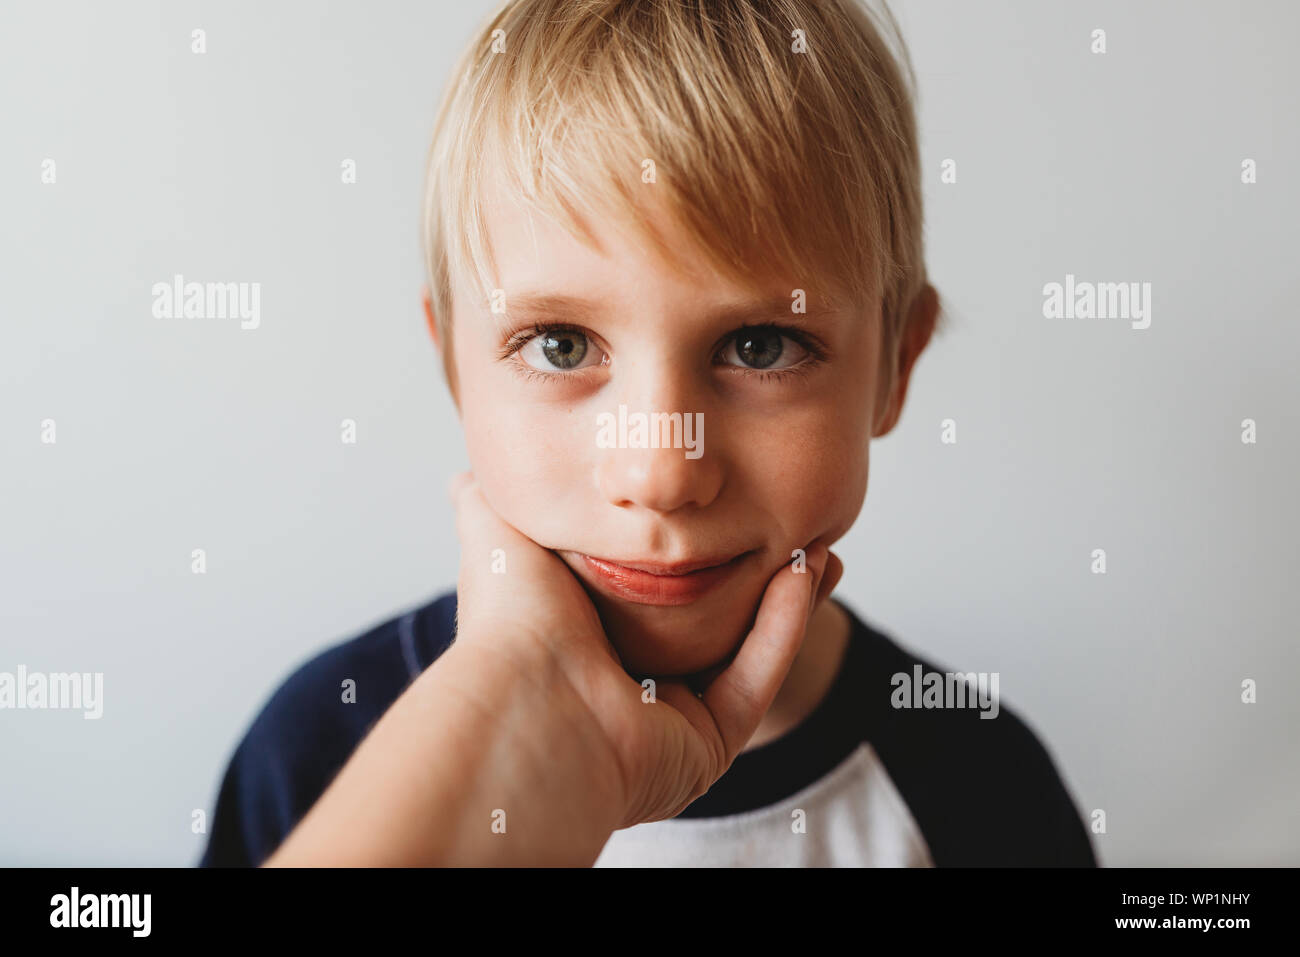 Loving moment of happy son with mother's hand holding his face Stock Photo